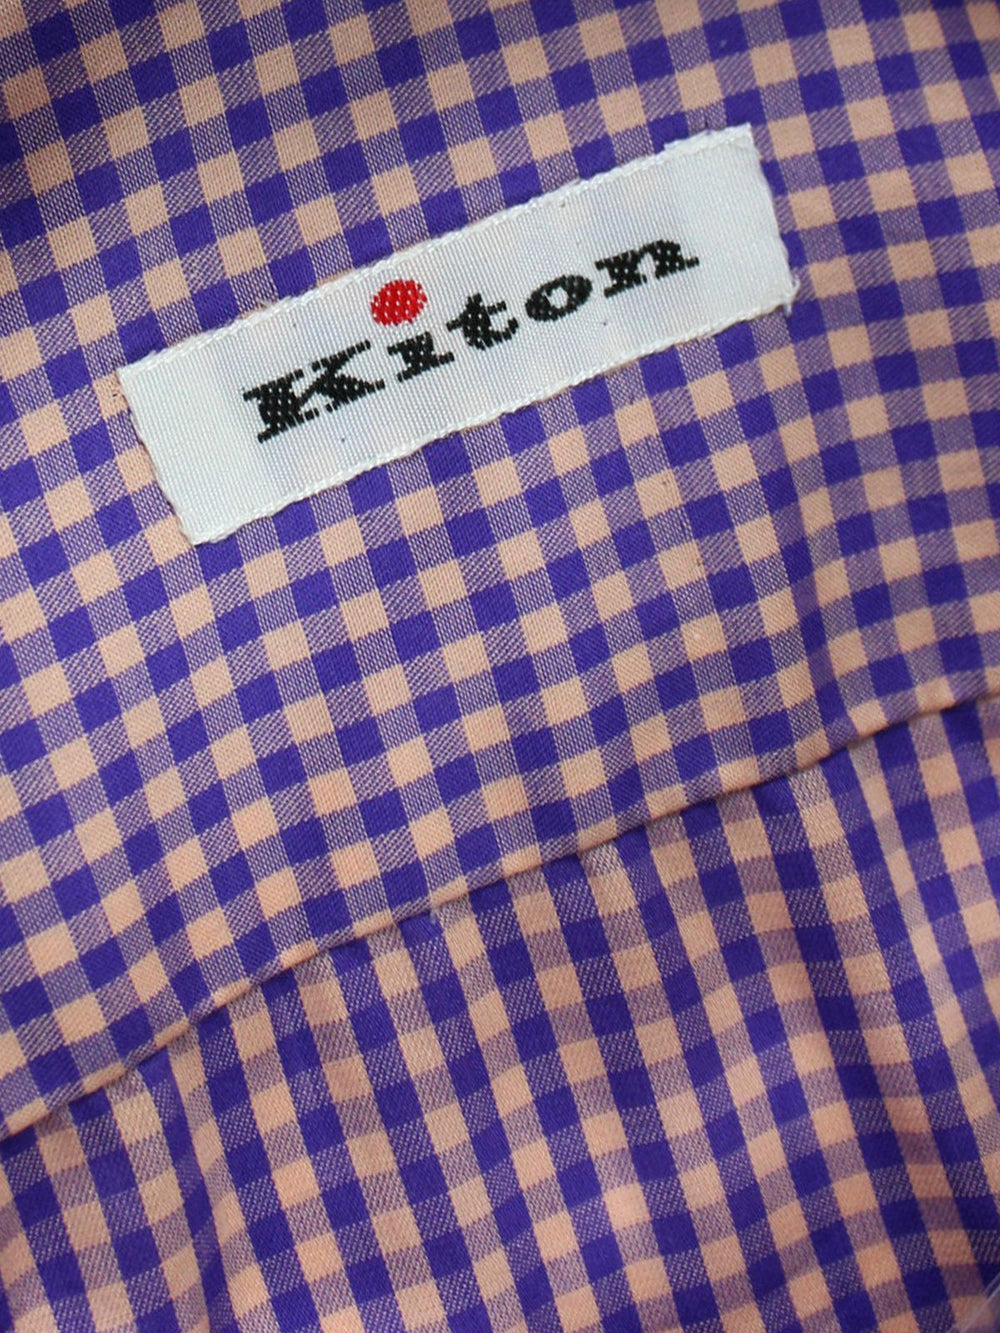 Kiton Sale | Kiton Suits, Ties, Belts, & More | Tie Deals